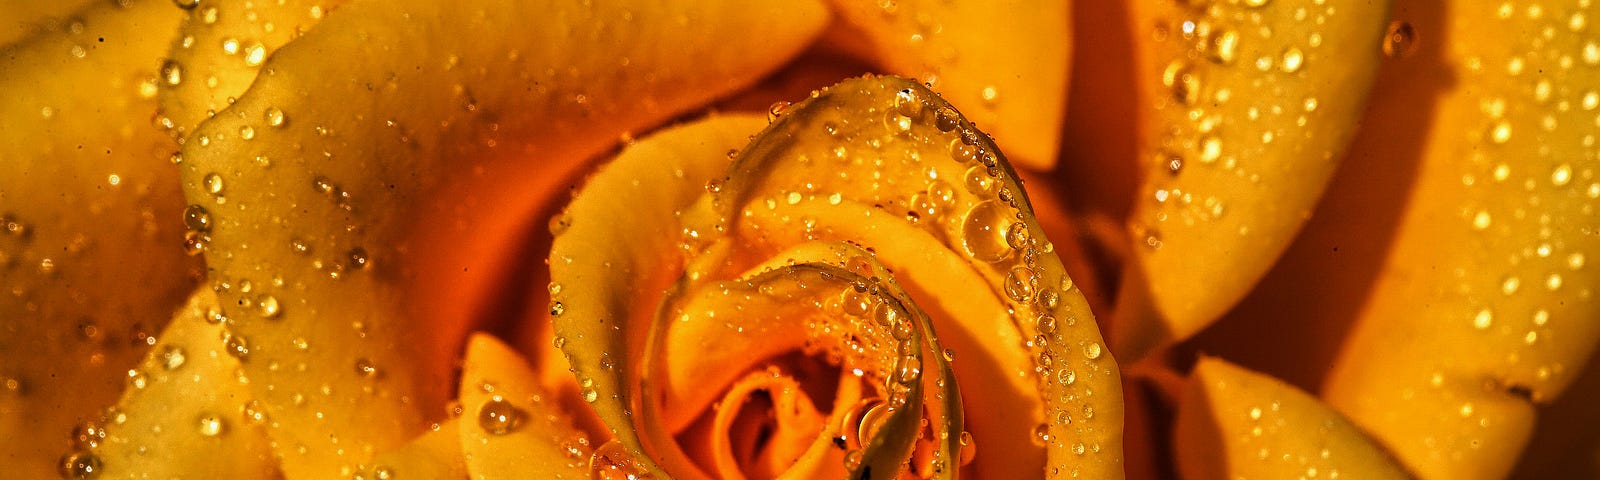 Close-up photo of a yellow rose, covered in water droplets